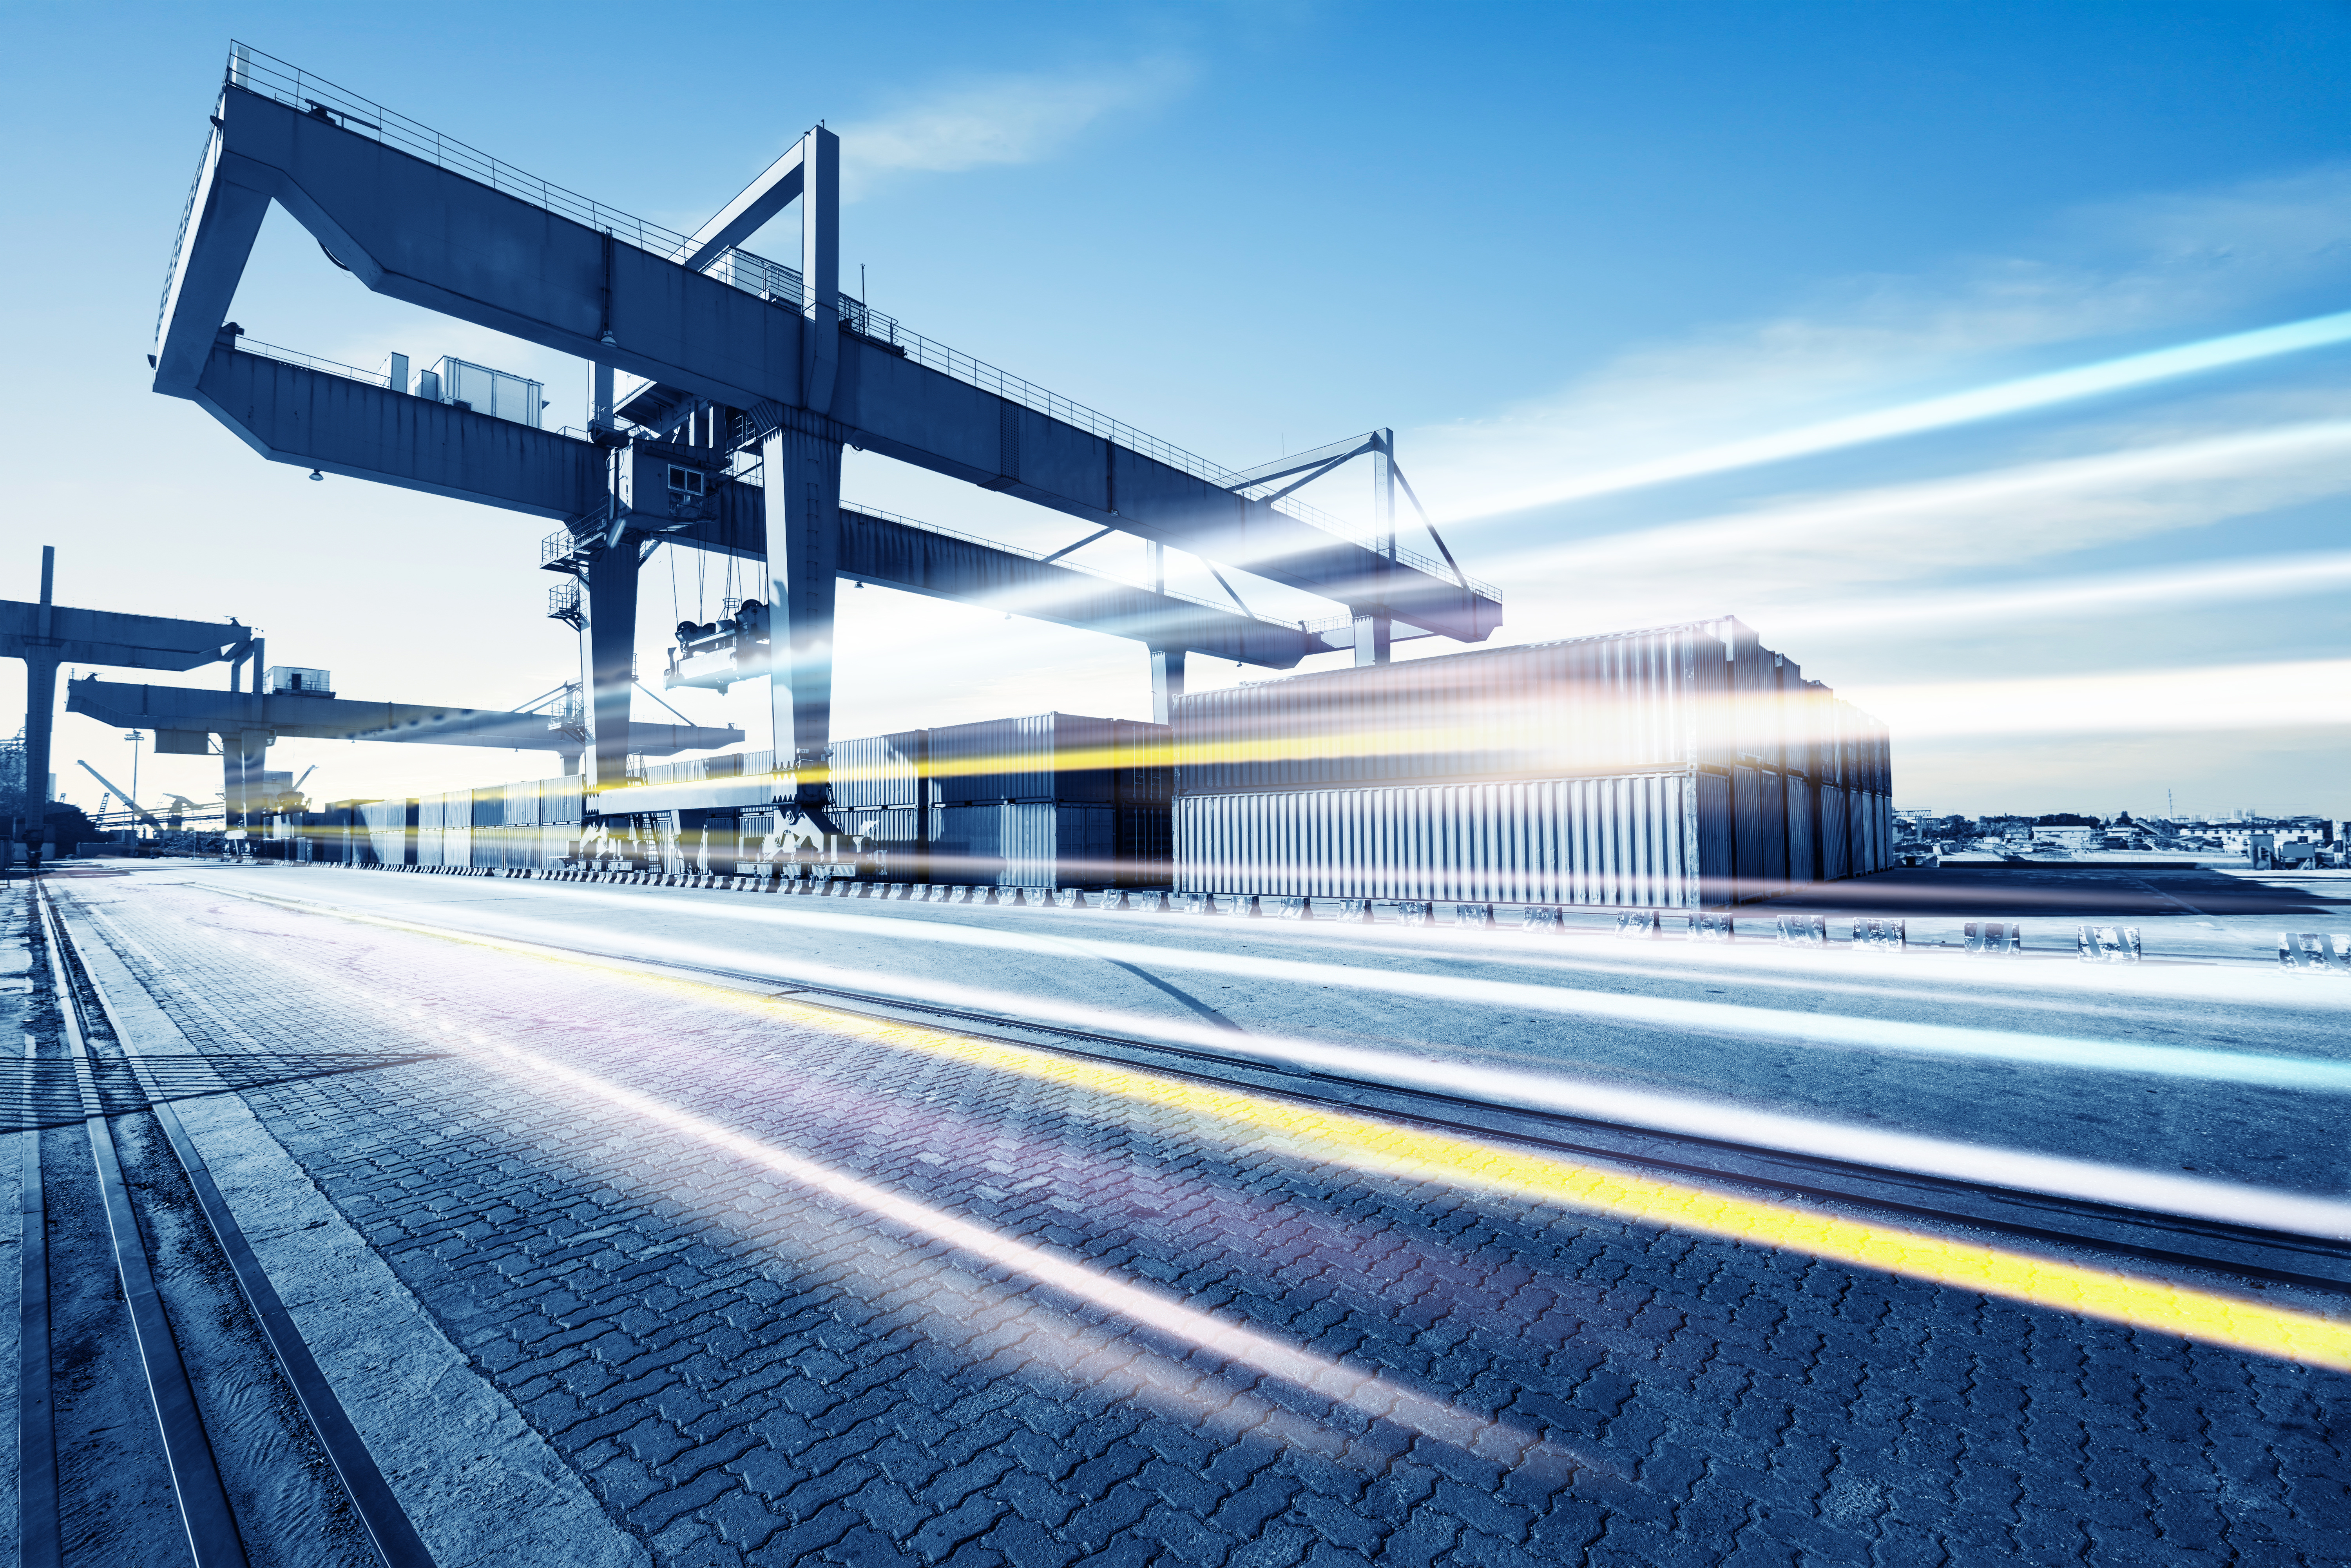 INTERMODAL NEWS & UPDATES IMPACTING YOUR BUSINESS TODAY - Sep 10, 2021